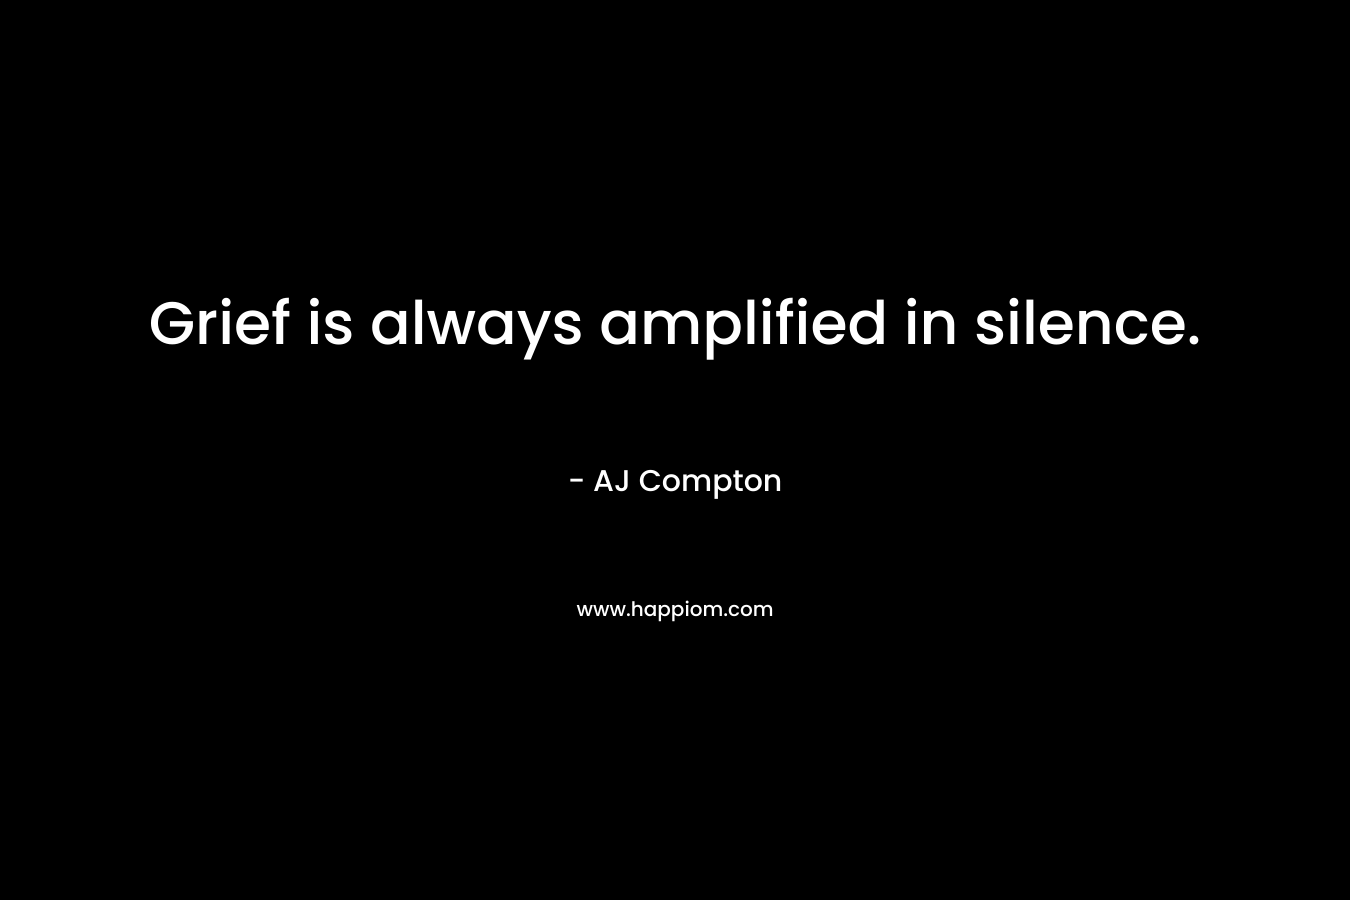 Grief is always amplified in silence. – AJ Compton